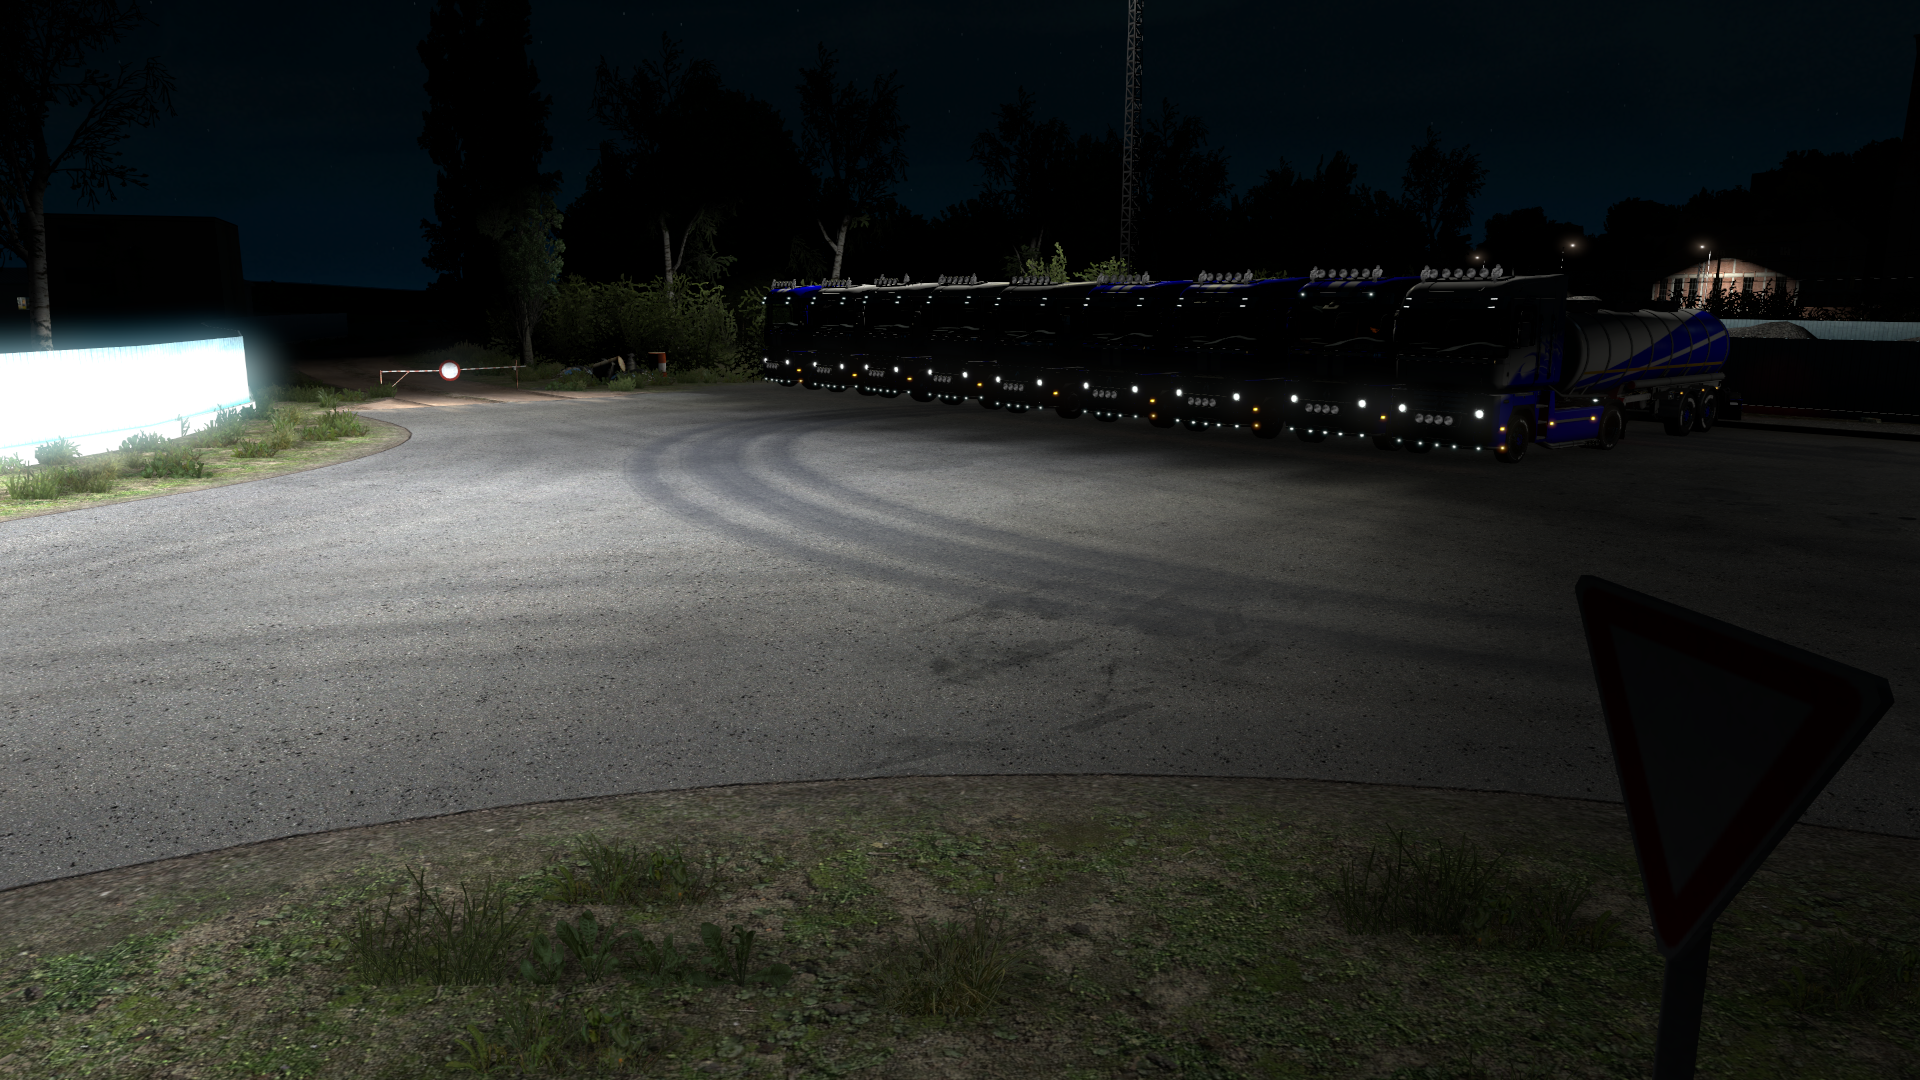 ets2_20210416_215939_00.png